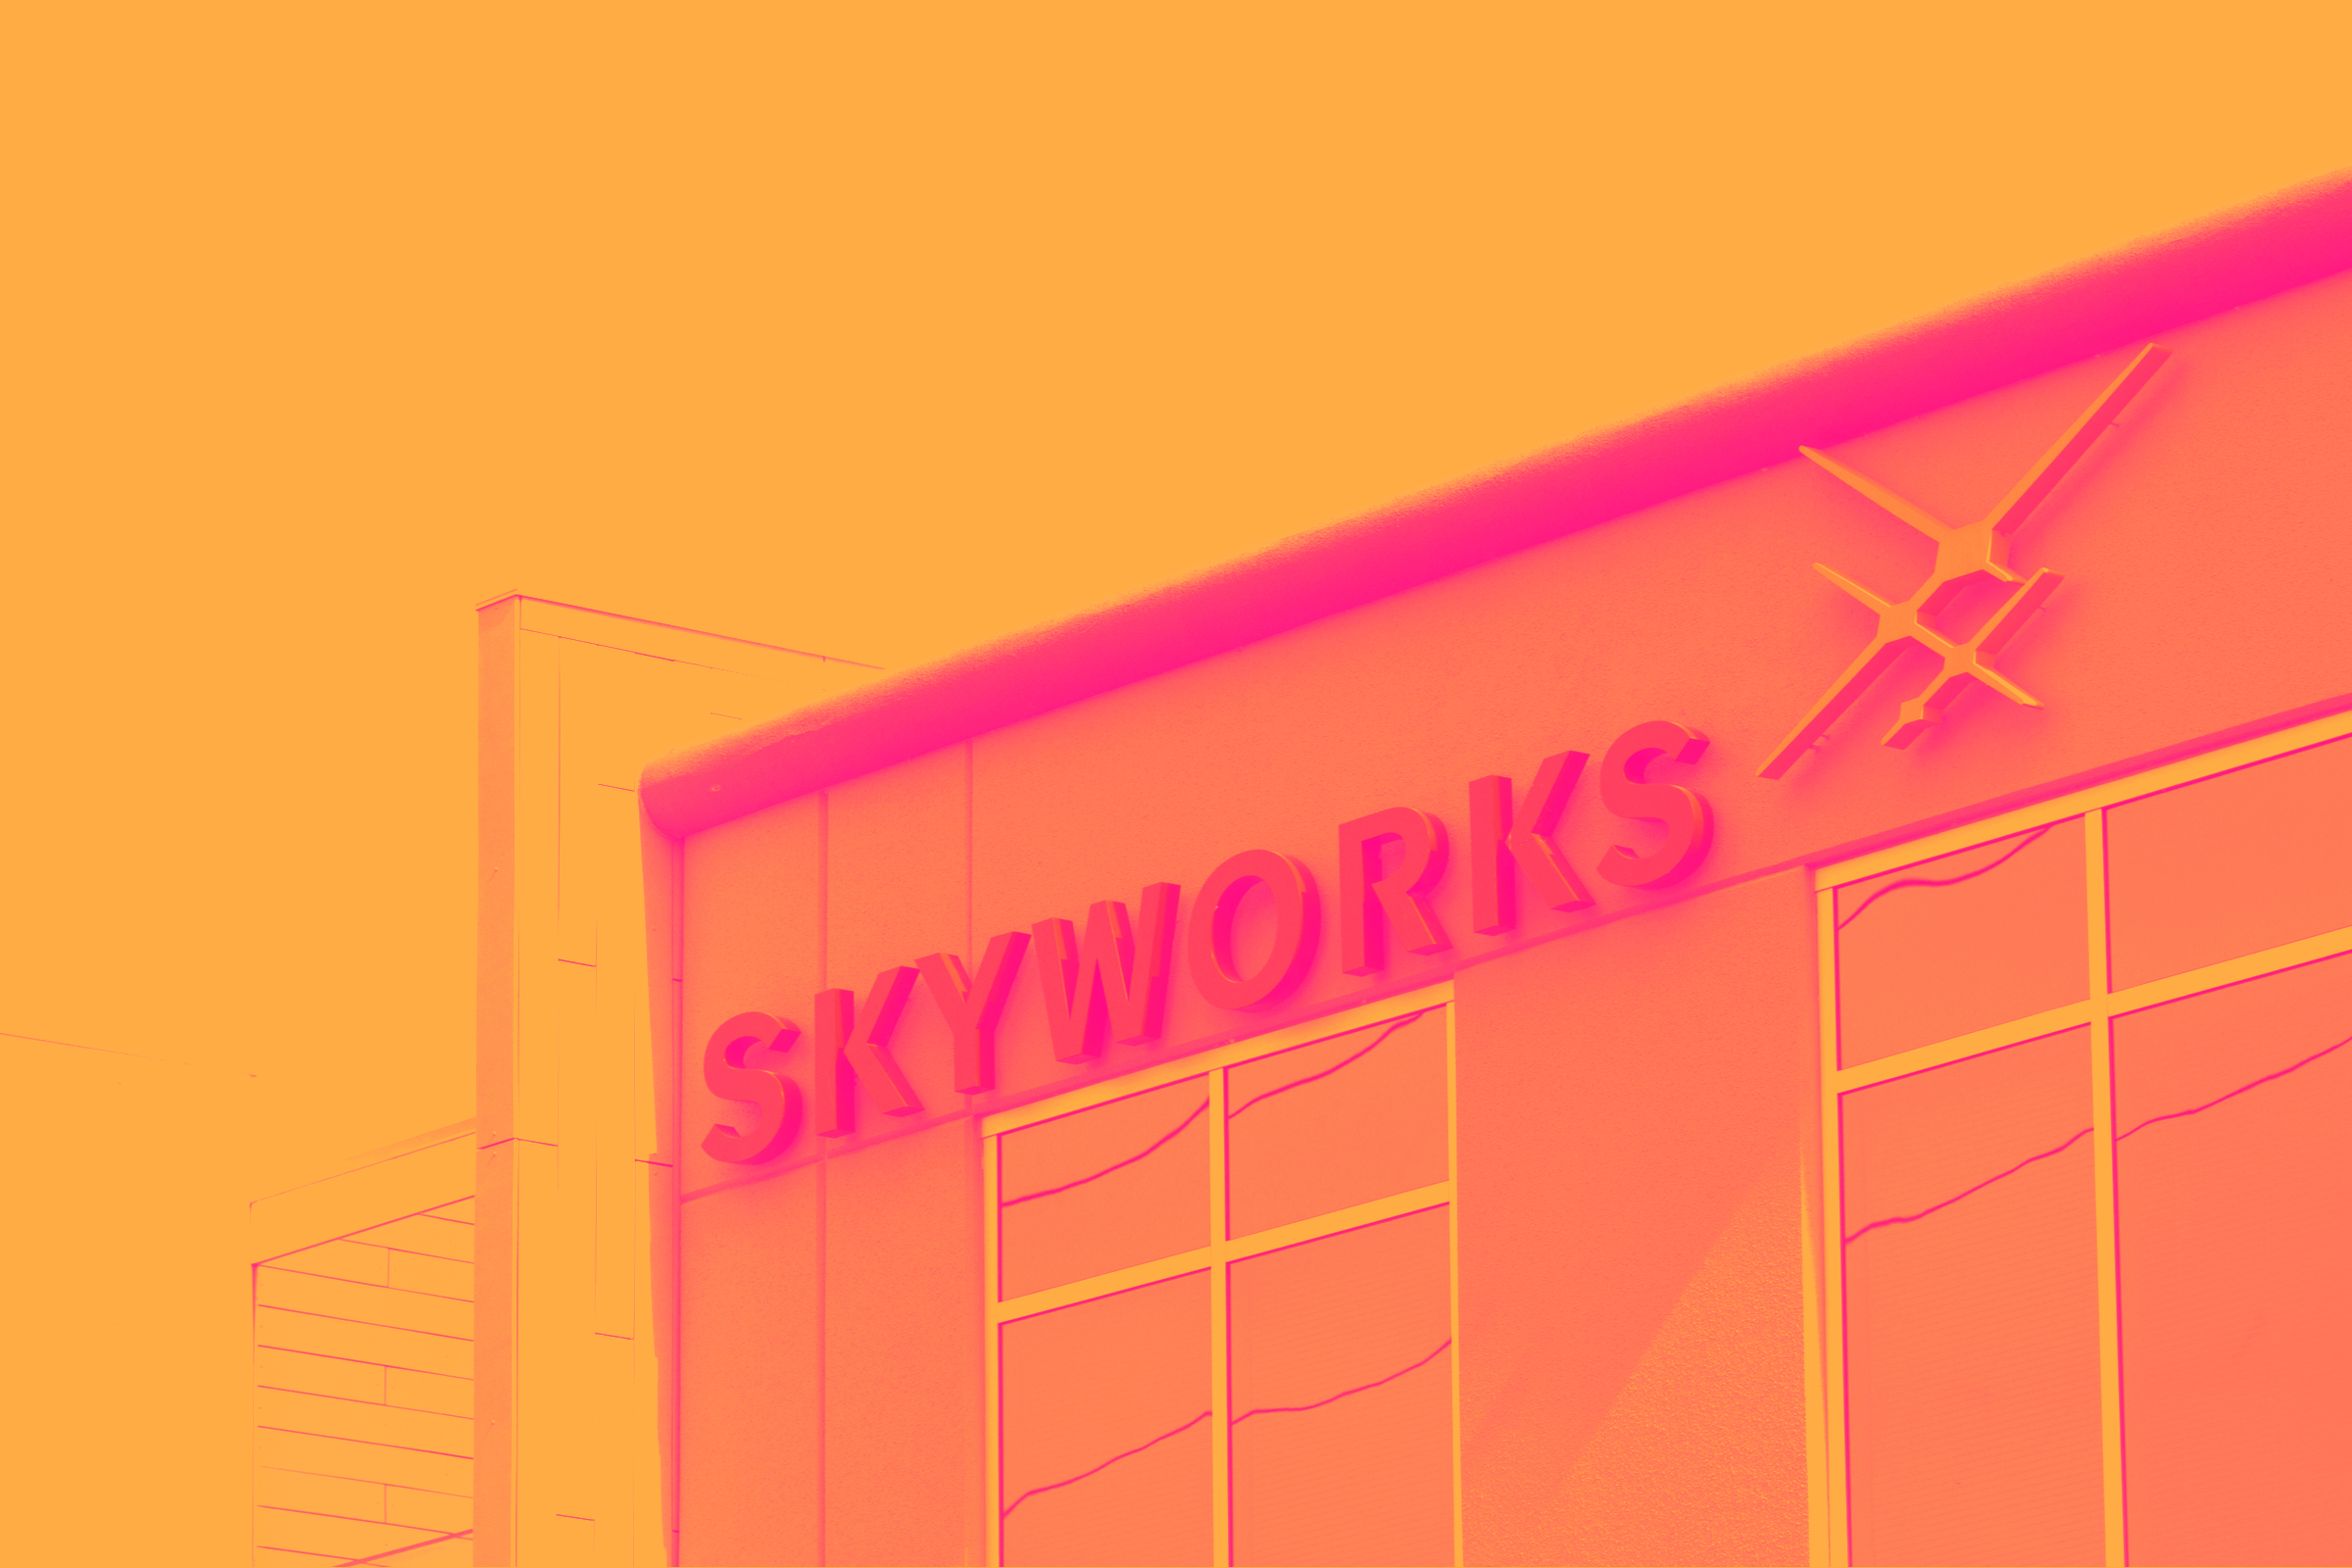 Skyworks solutions cover image r J0yp6a